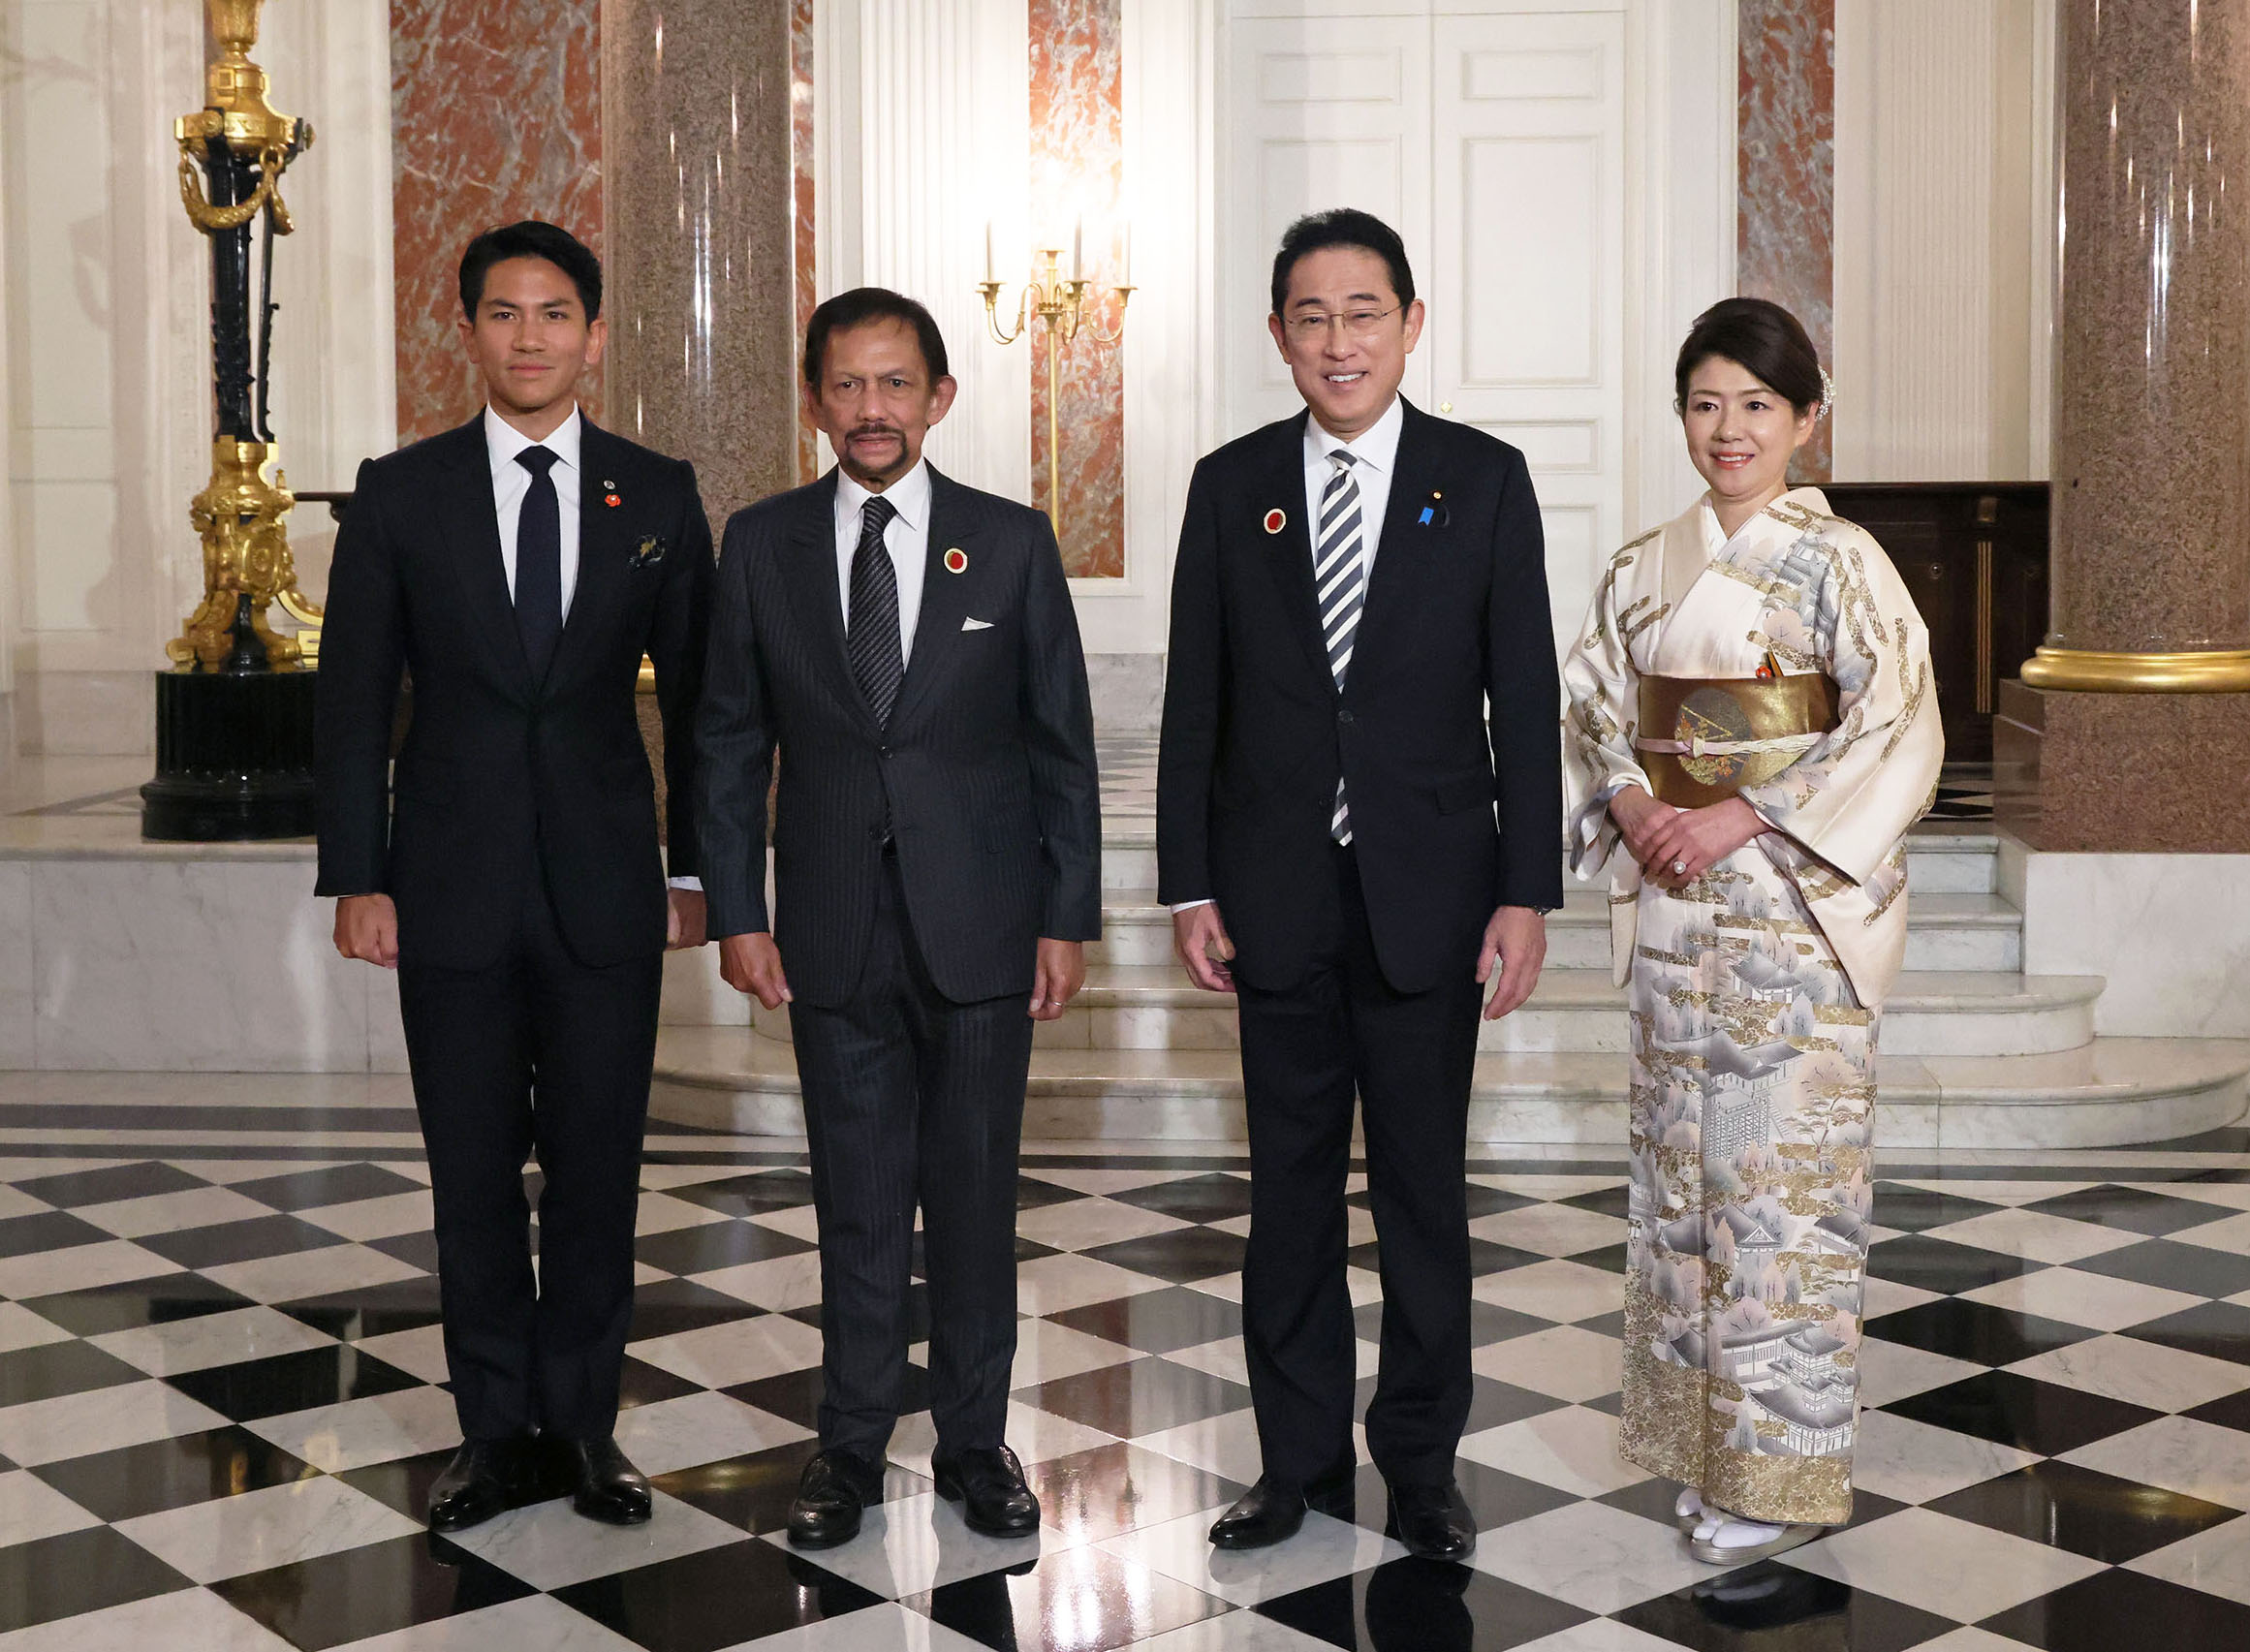 Prime Minister Kishida welcoming His Majesty Bolkiah, Sultan of Brunei Darussalam, and His Royal Highness Prince Mateen